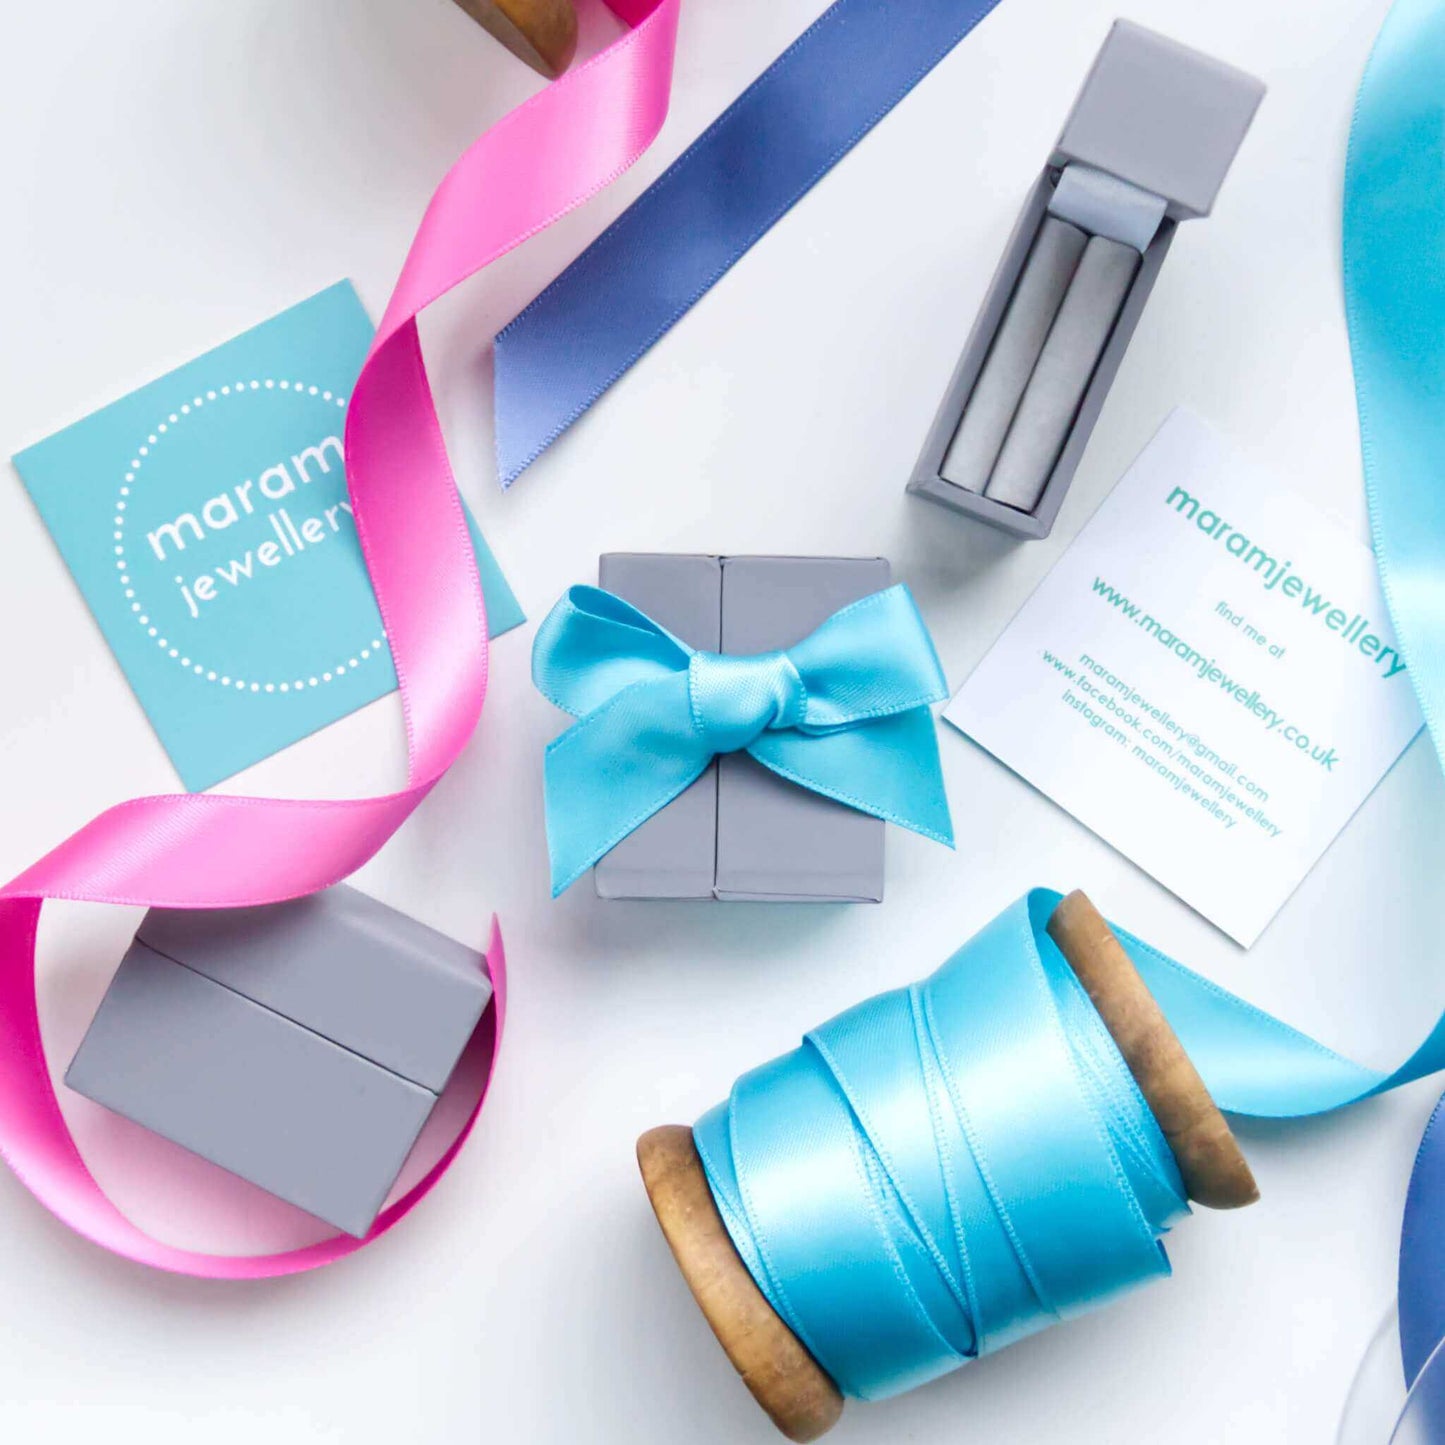 maram jewellery ring packaging - a light grey box wrapped in colourful ribbon. Image shows box open and closed with a ribbon tie  with a selection of pink turquoise and blue ribbons in the background. maram jewellery is a small boutique jeweller in Scotland UK